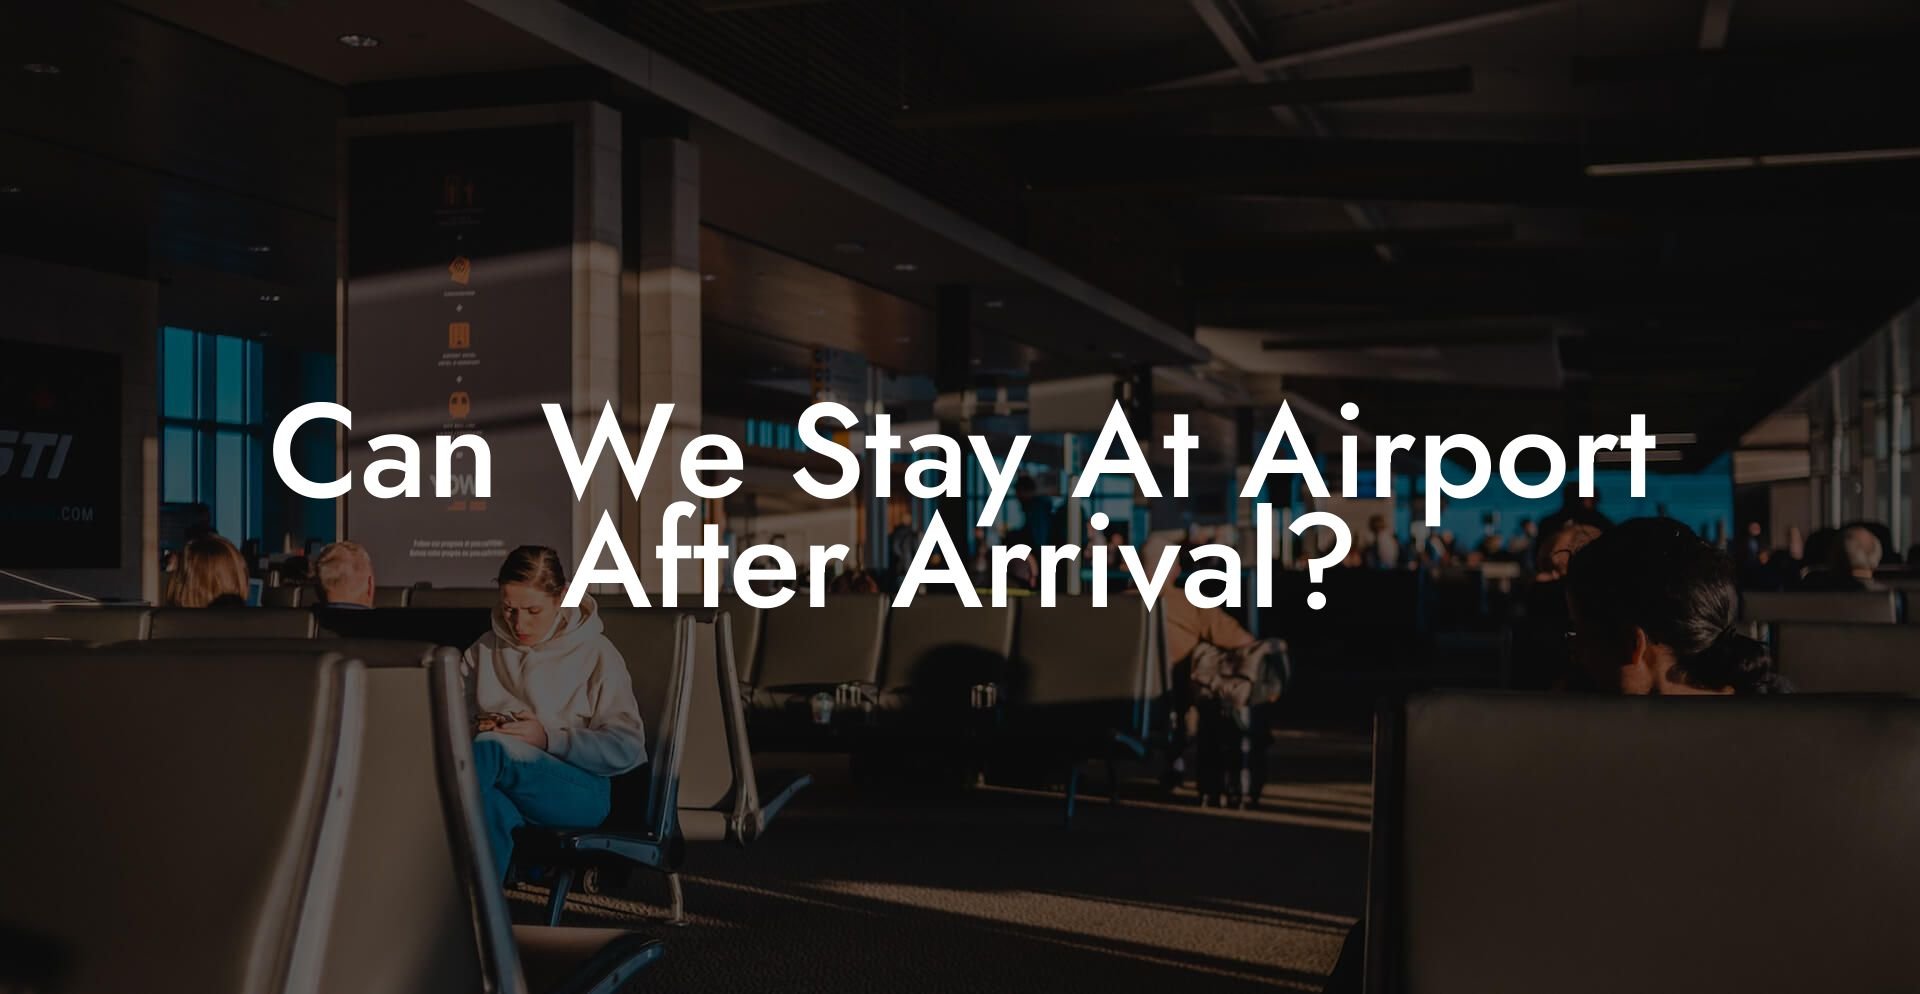 Can We Stay At Airport After Arrival?